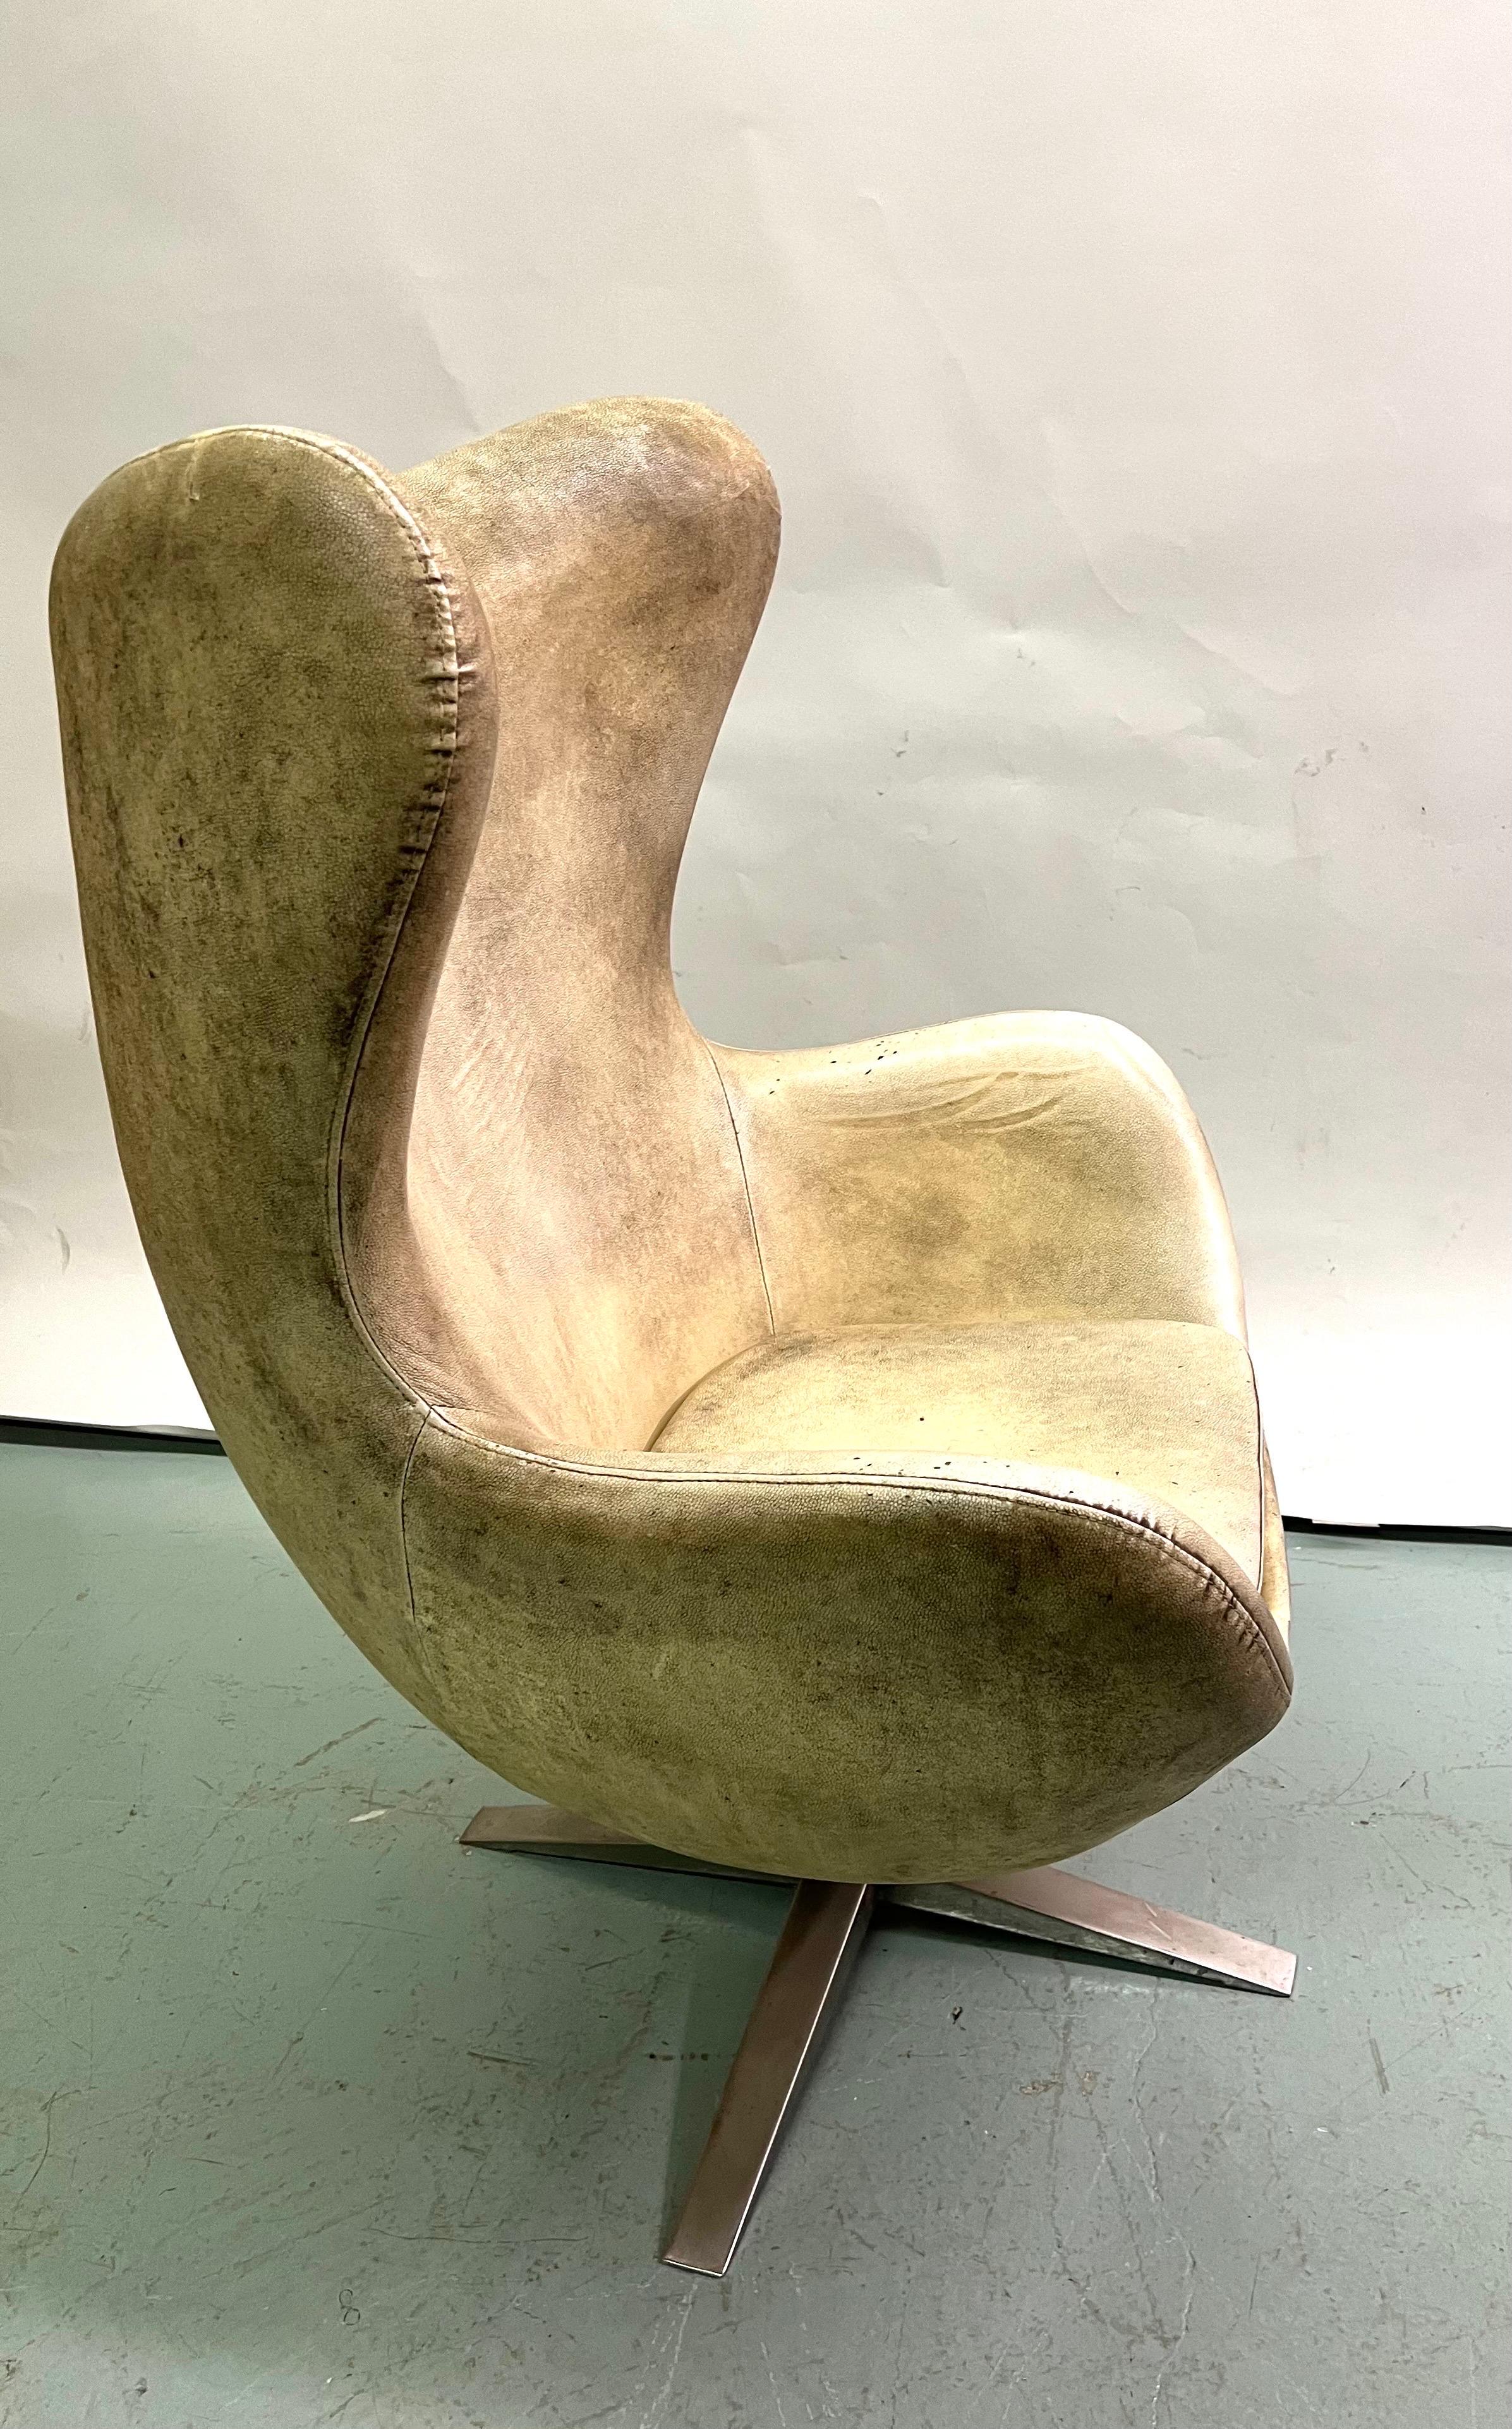 Early Model, Pair of Vintage Leather Danish Egg Chair, Arne Jacobsen, c. 1960 For Sale 1